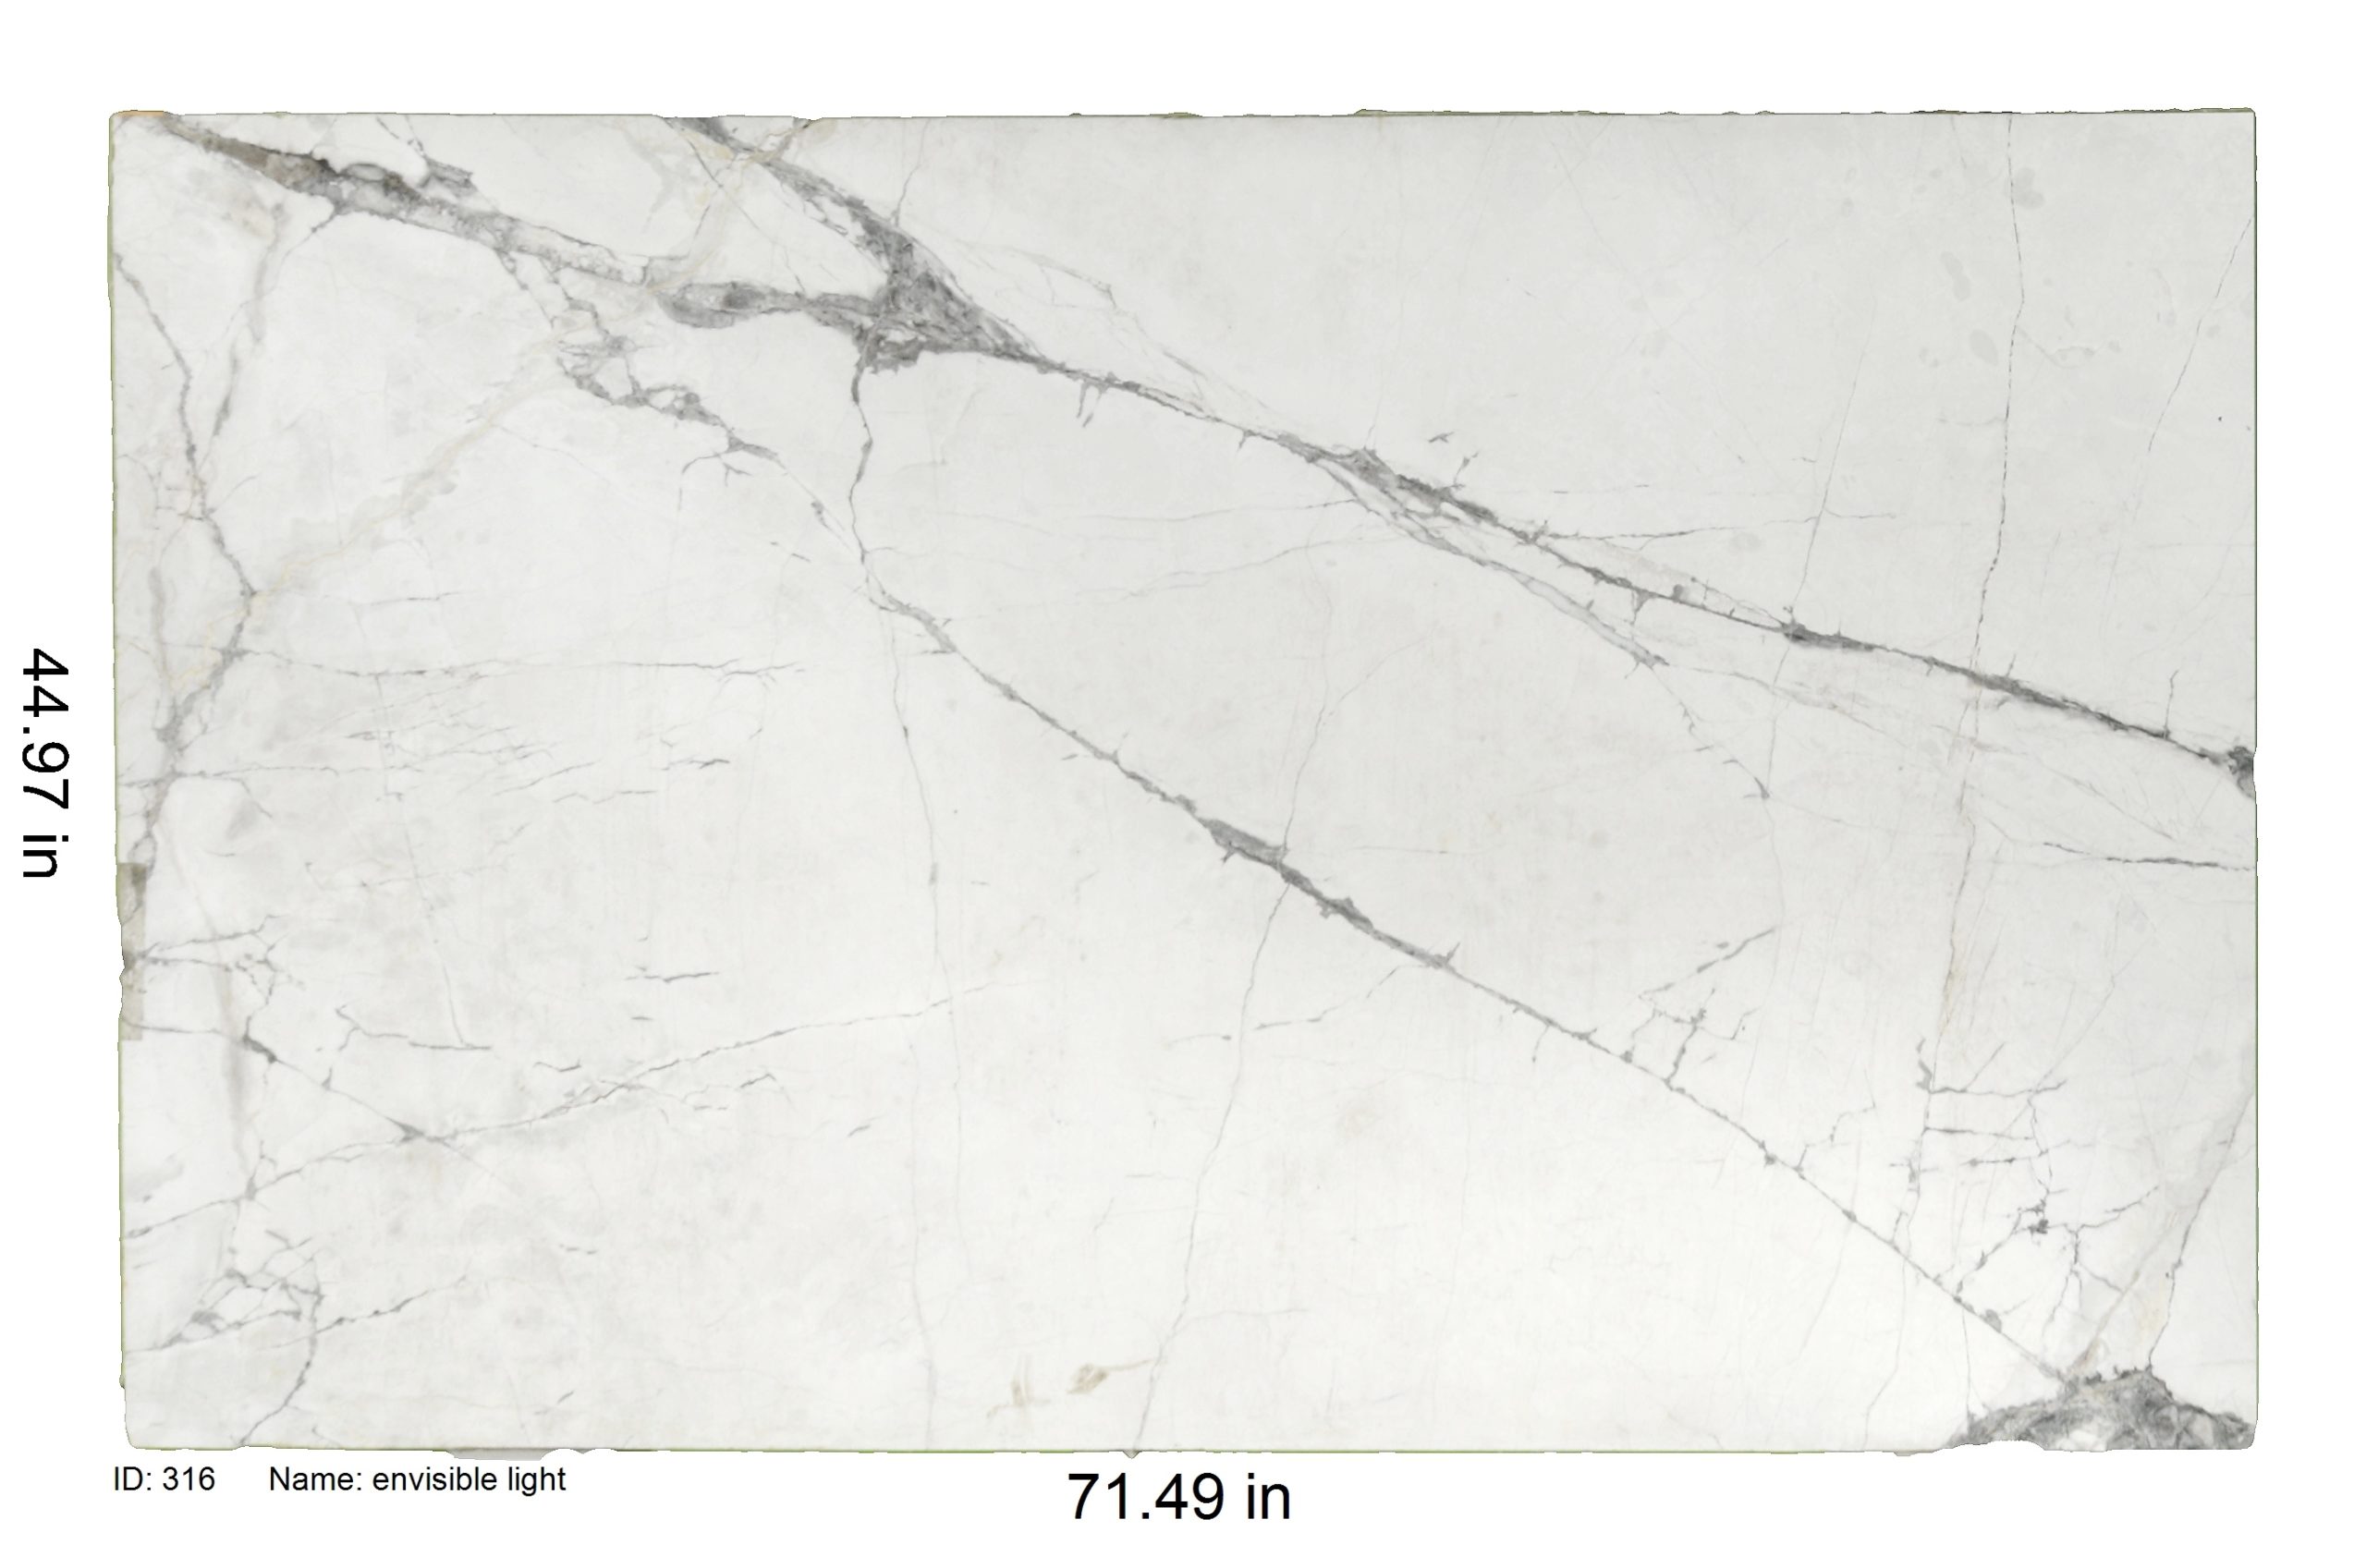 White Marble with Heavy Grey Veining<br />
ID: 316<br />
Name Envisible Light<br />
Size 44.97x71.49